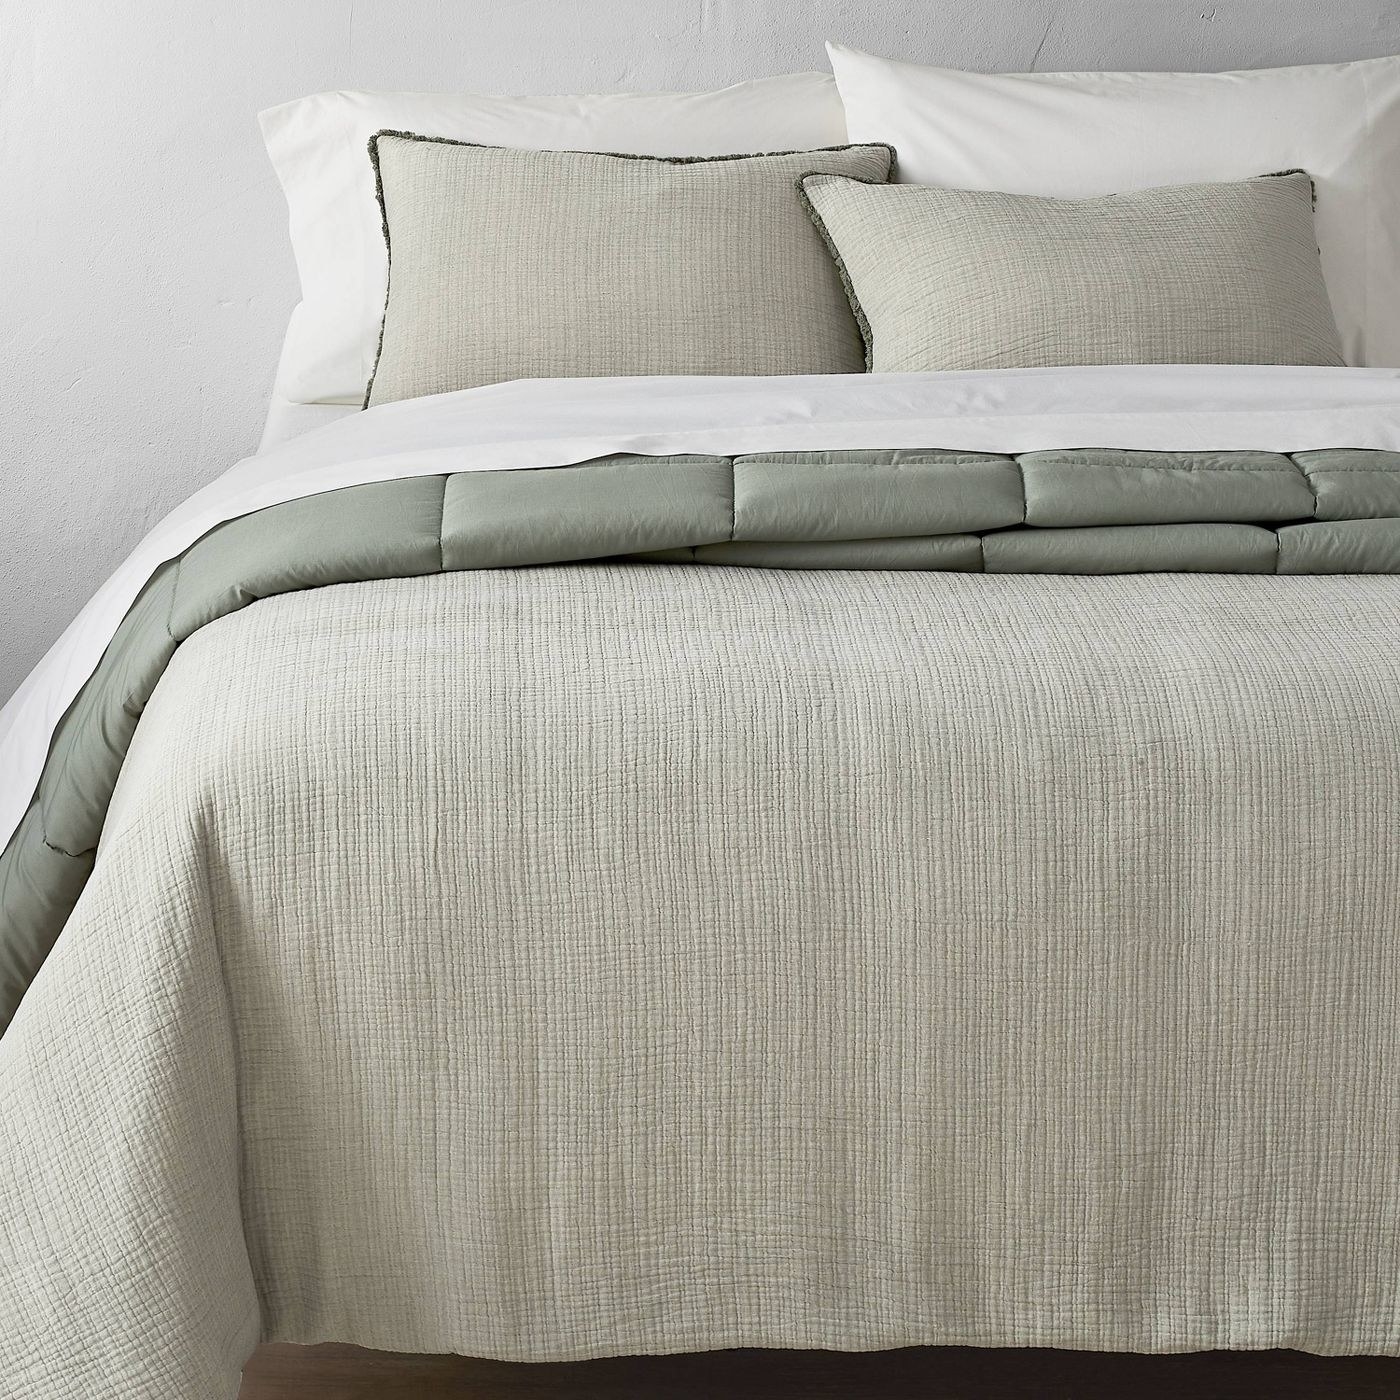 Comforter set in color &quot;sage green&quot;